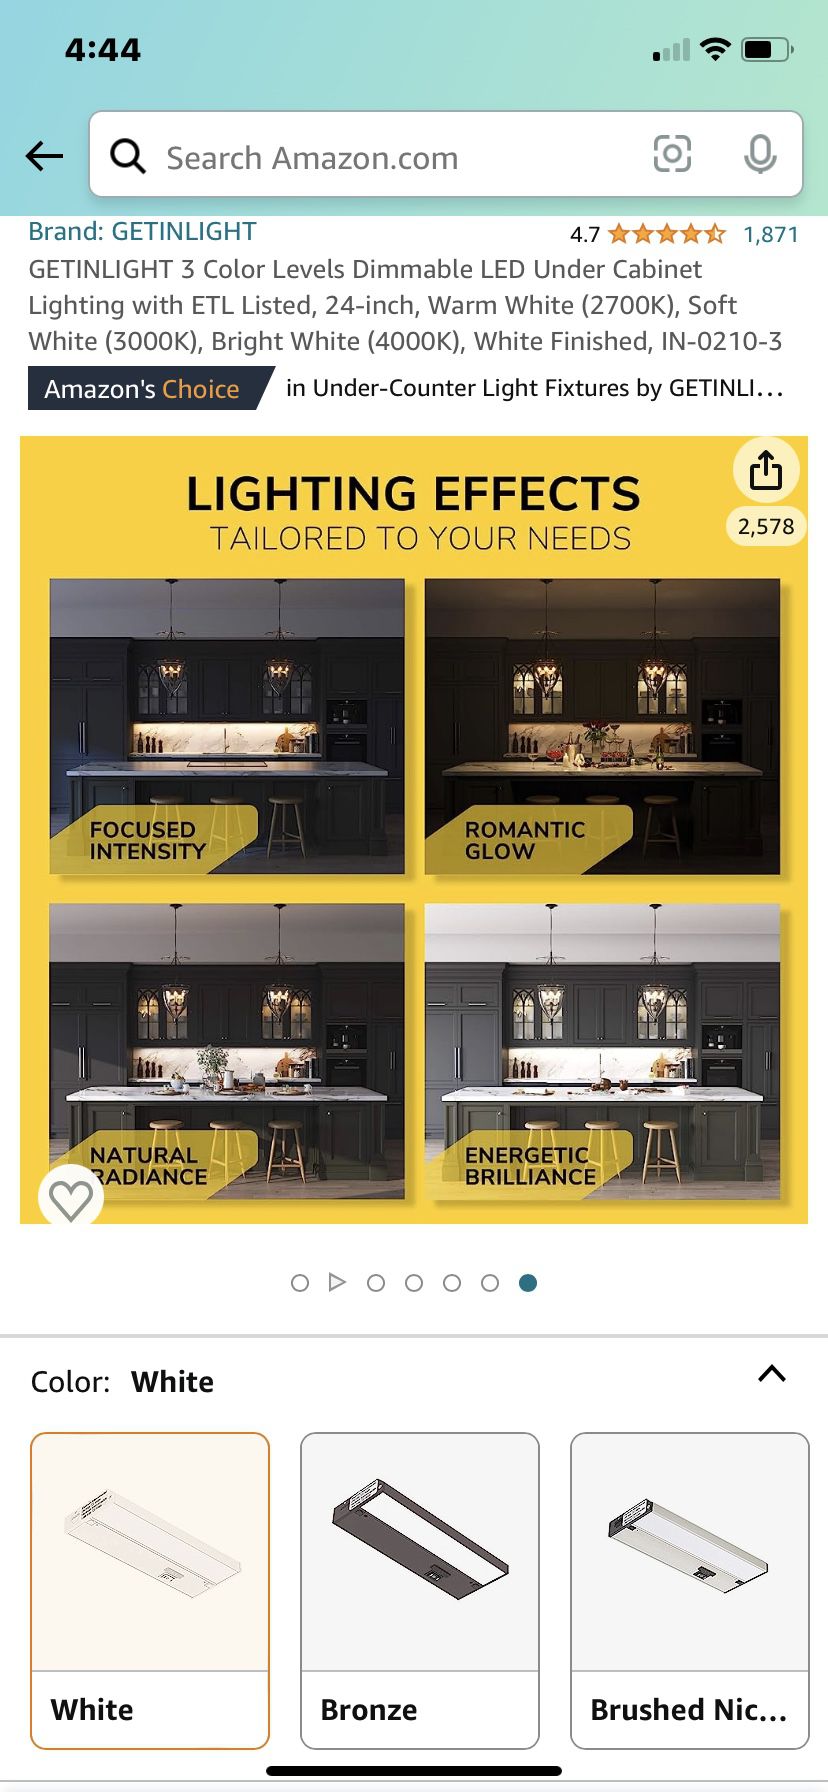 GetInLight Color Levels Dimmable LED Under Cabinet Lighting with ETL Listed, Warm White (2700K), Soft White (3000K), Bright White (4000K), - 2